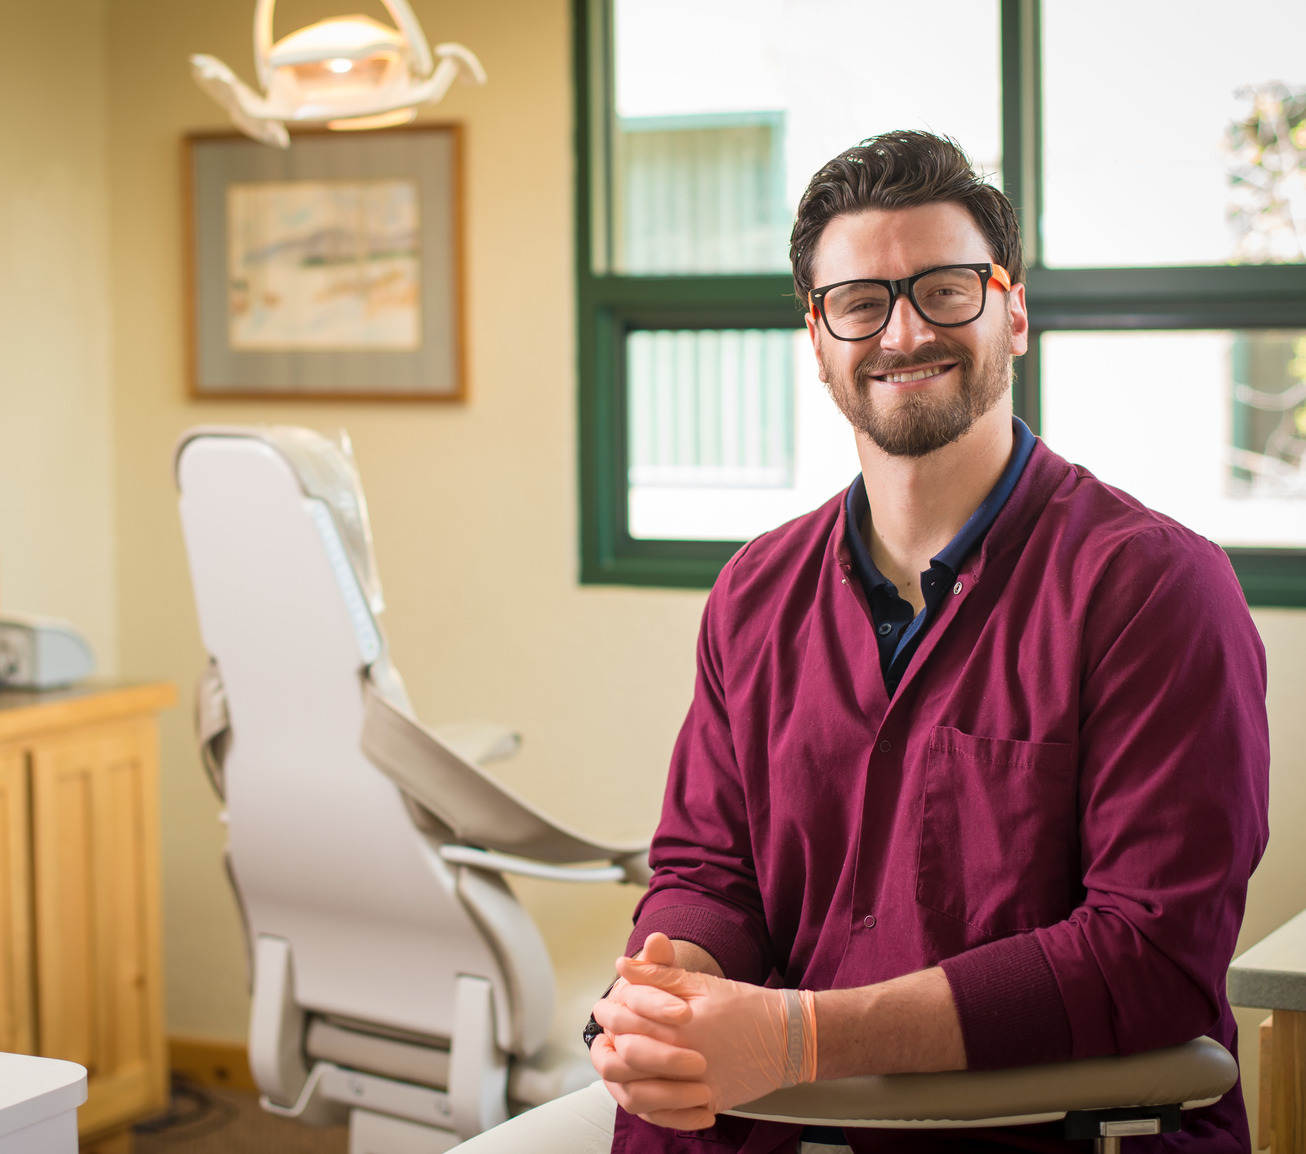 A former UW student stands in their dental exam room